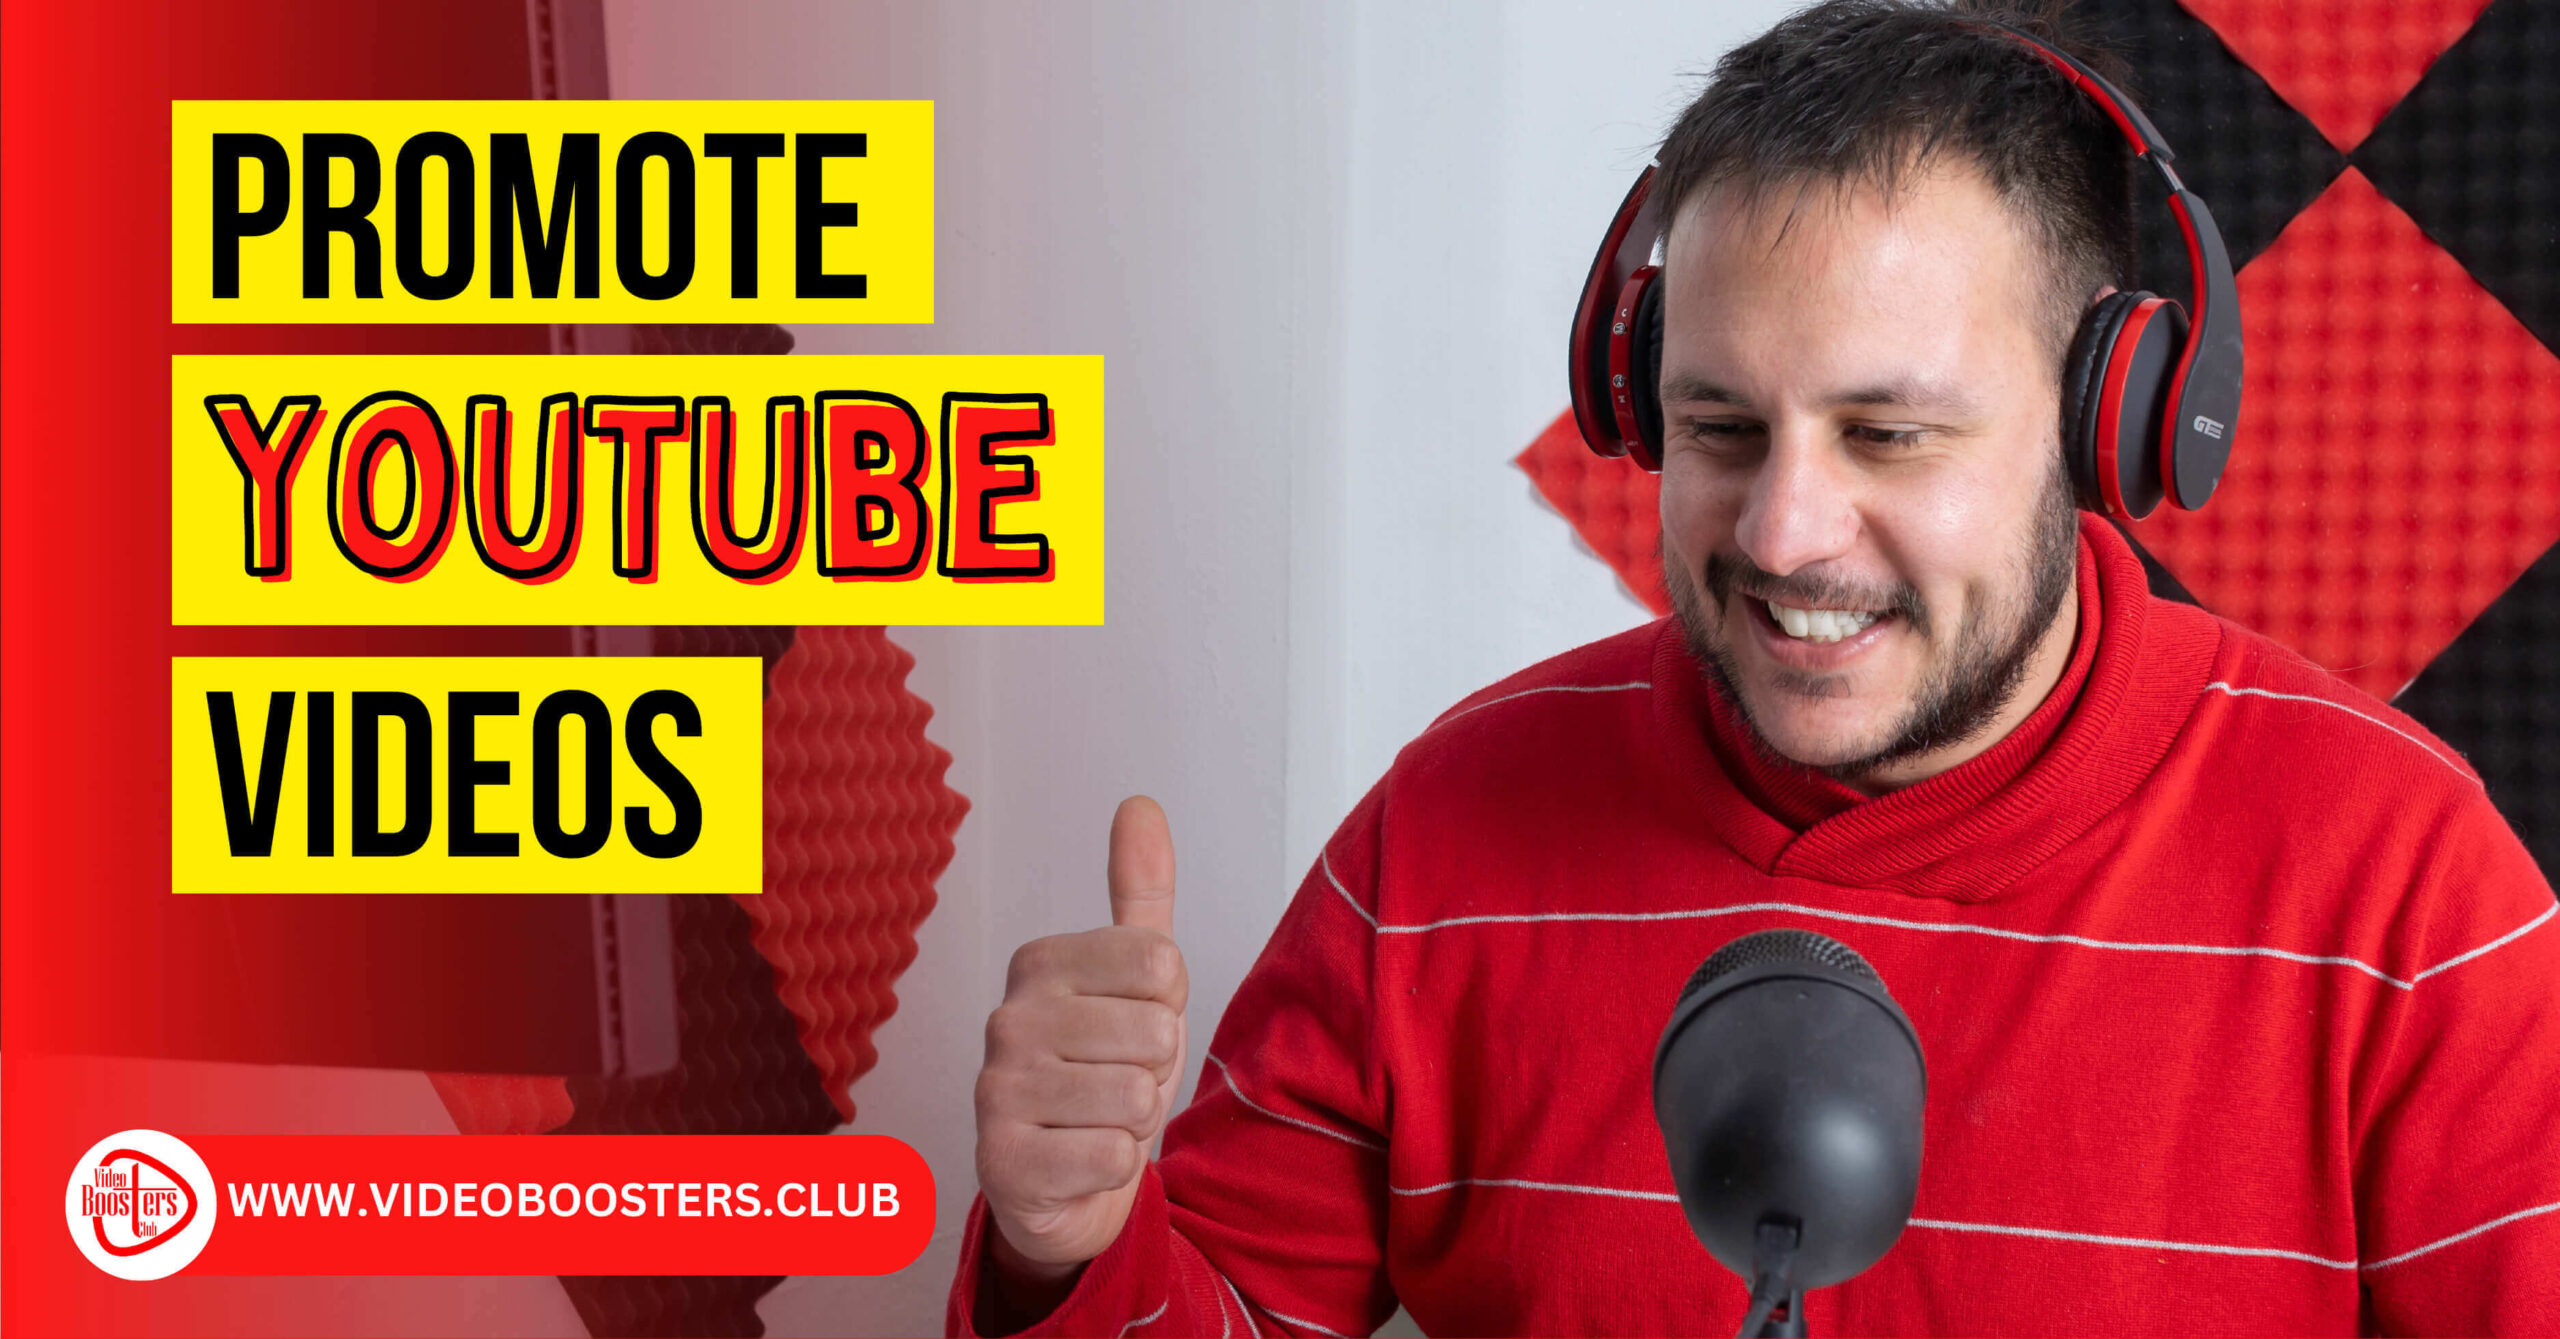 15 Actionable Steps to Promote Your YouTube Video